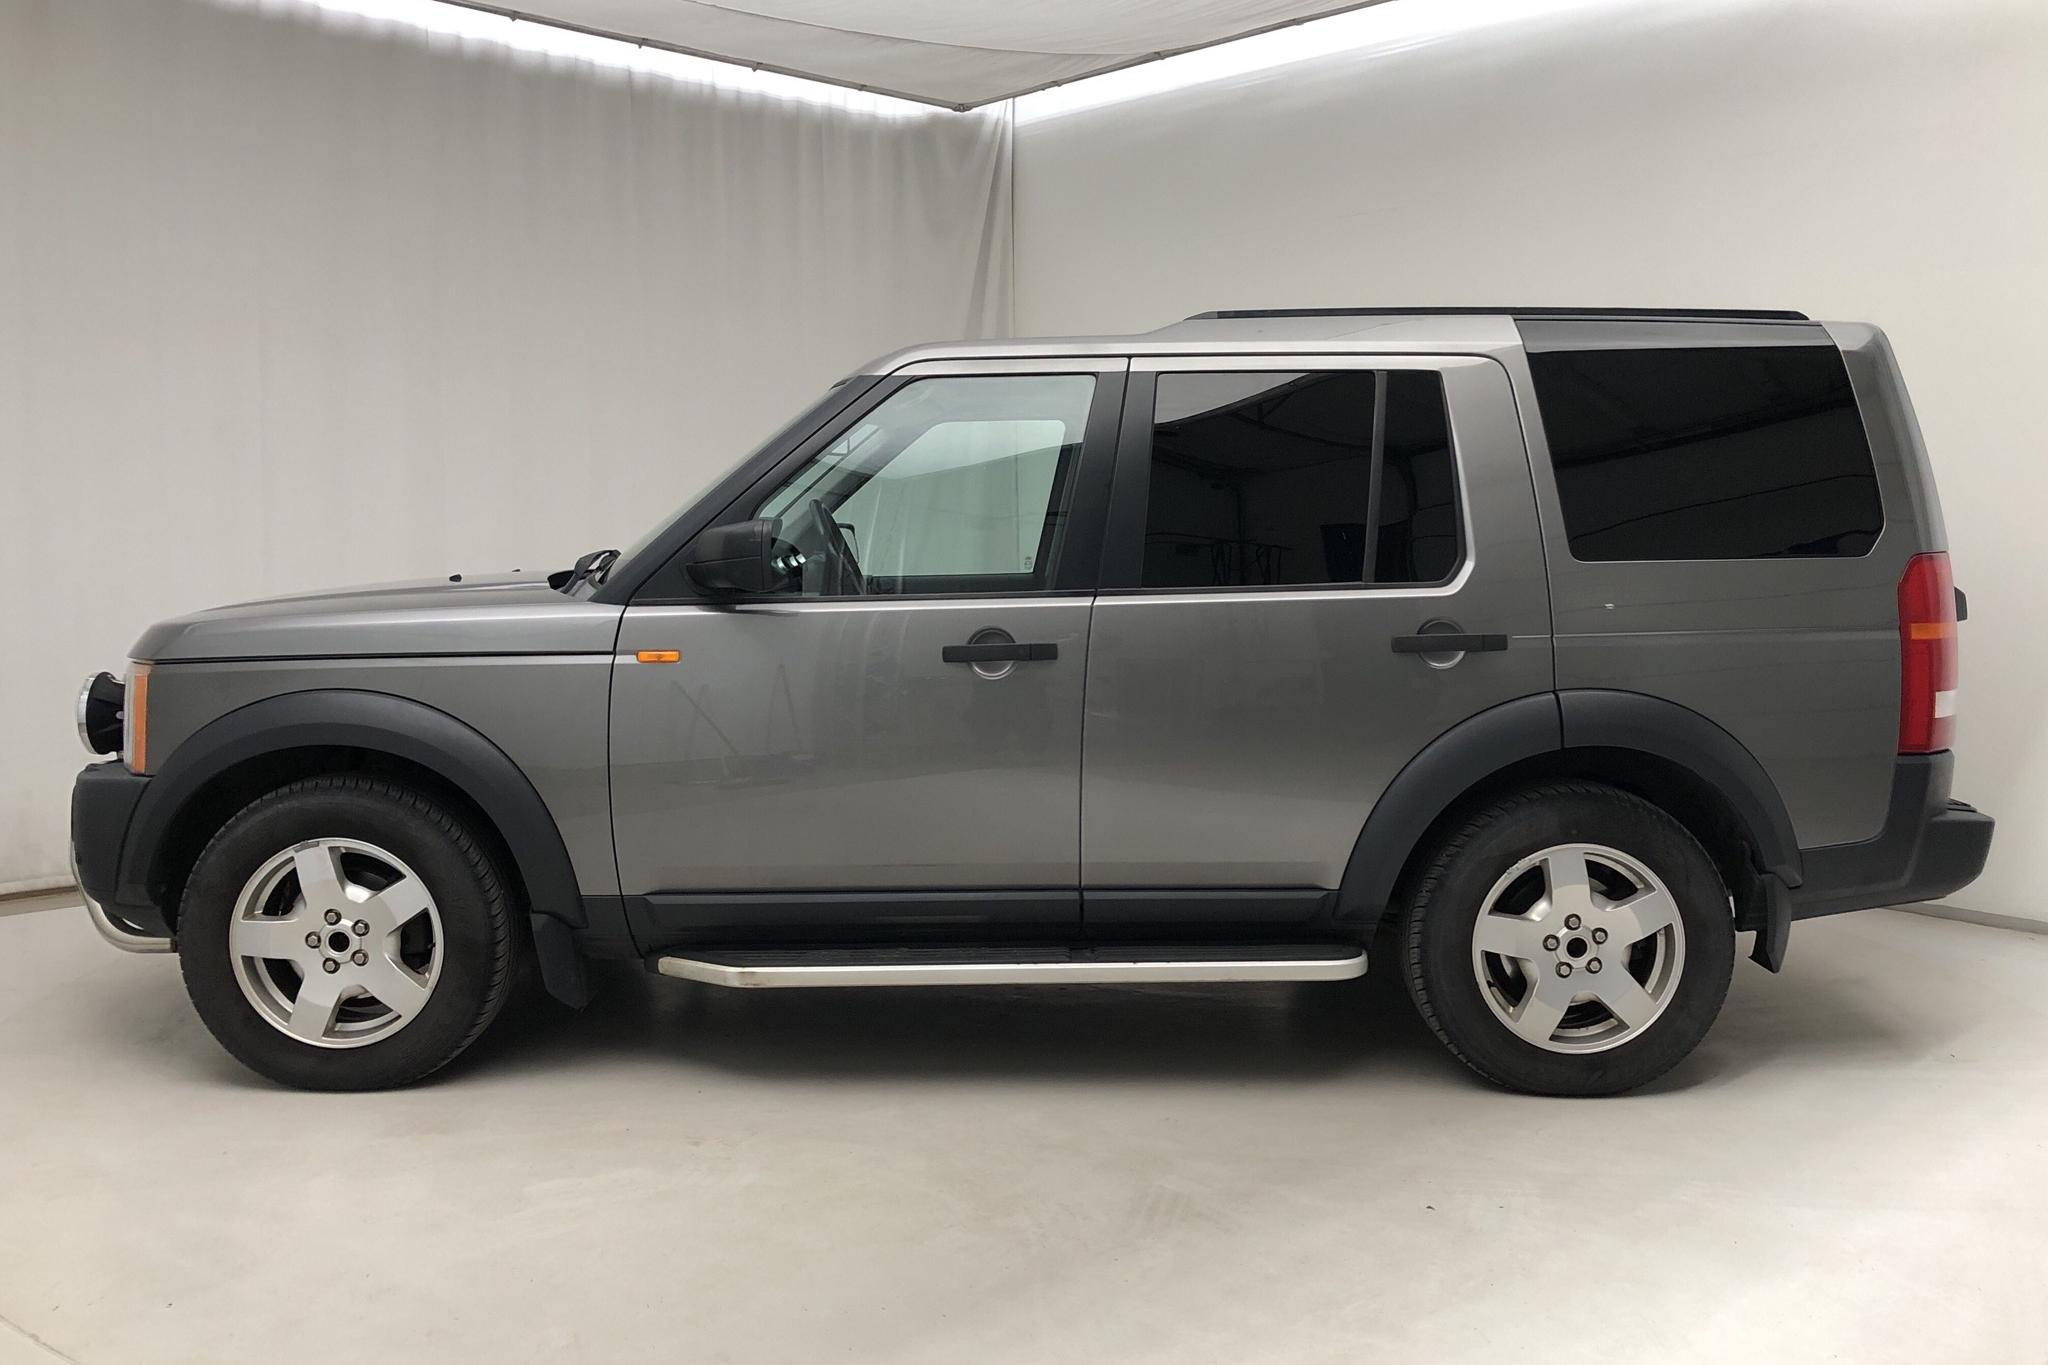 Land Rover Discovery 3 2.7 TDV6 (190hk) - 183 950 km - Automatic - gray - 2008